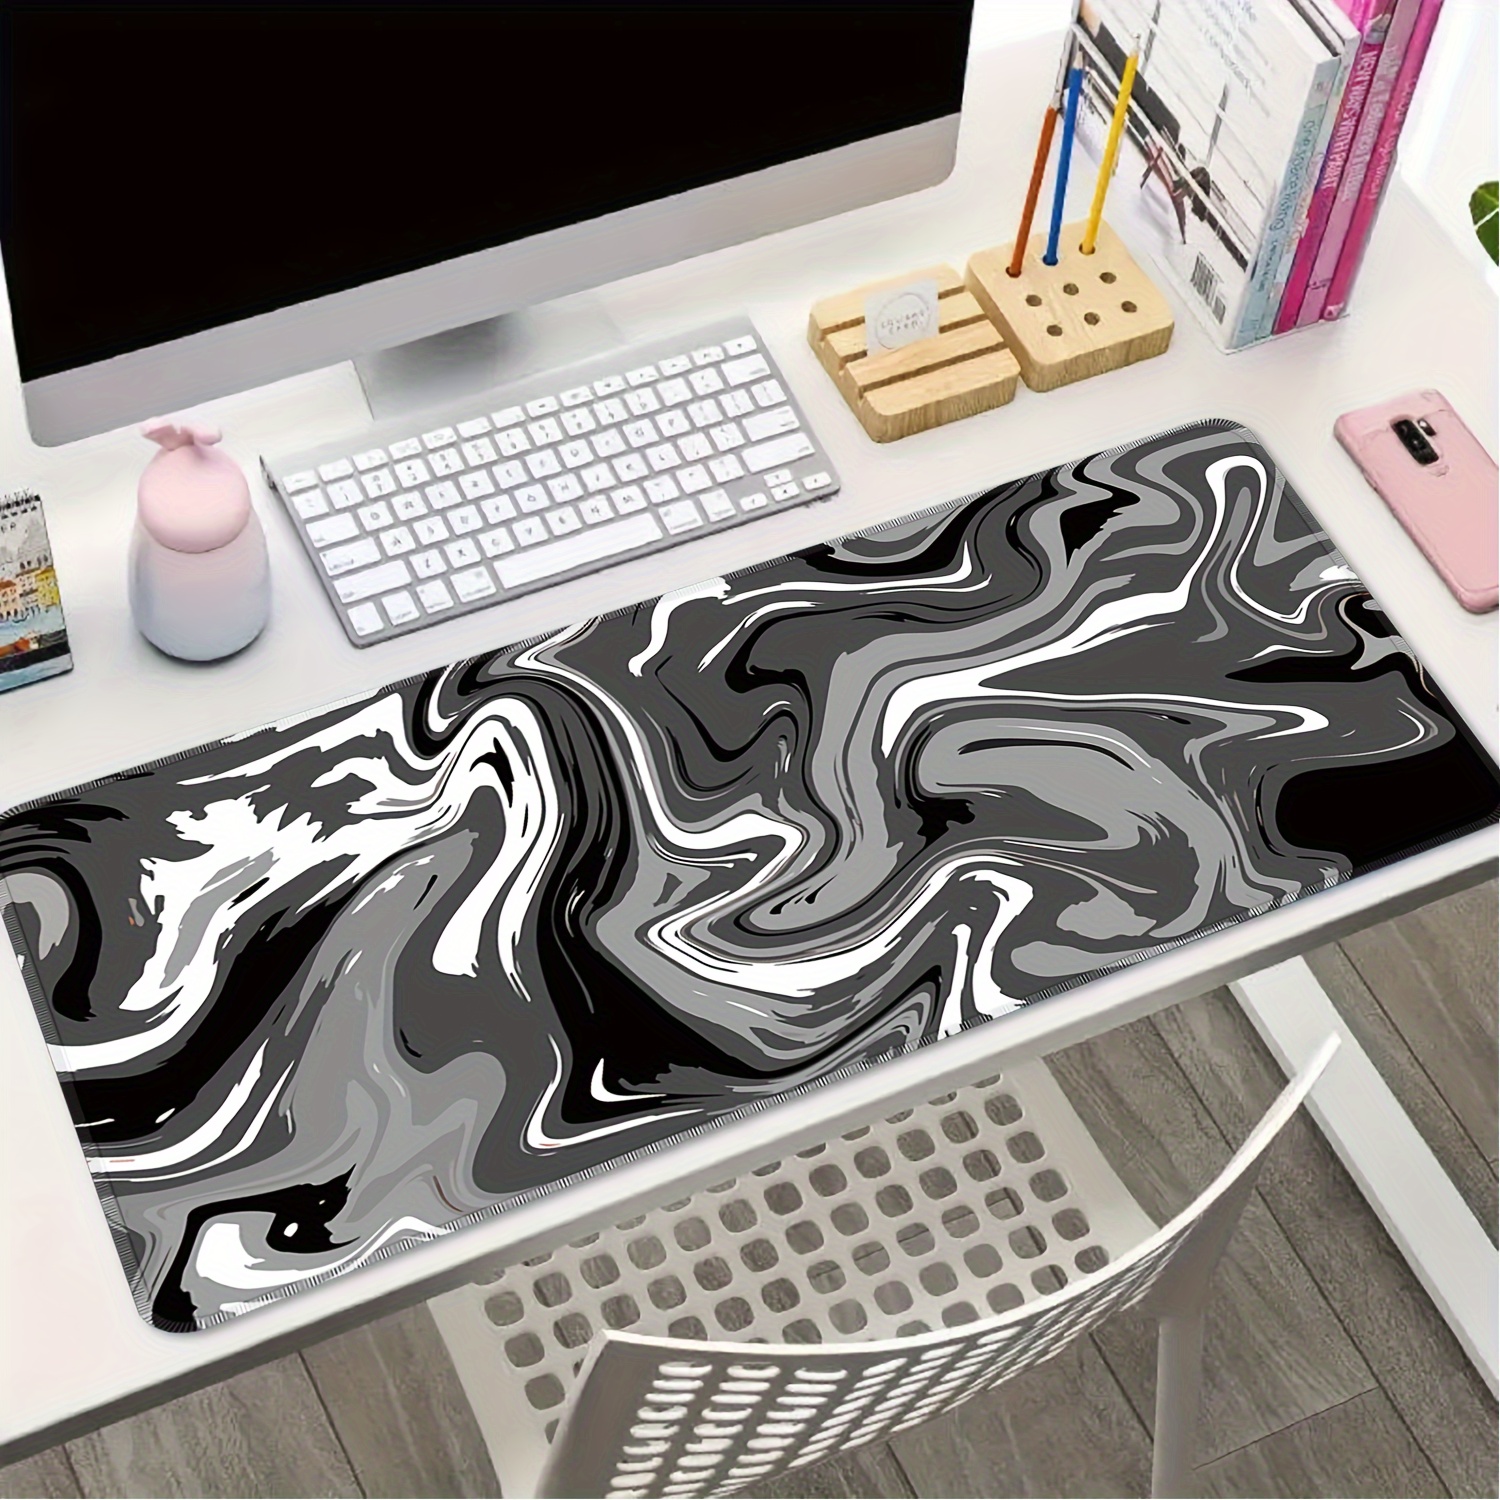 FX Fly Swallow Artisan Mouse Pad Large Speed Gaming Accessories Keyboard  Mousepad Gamers Decoracion Laptop Black White Desk Mat